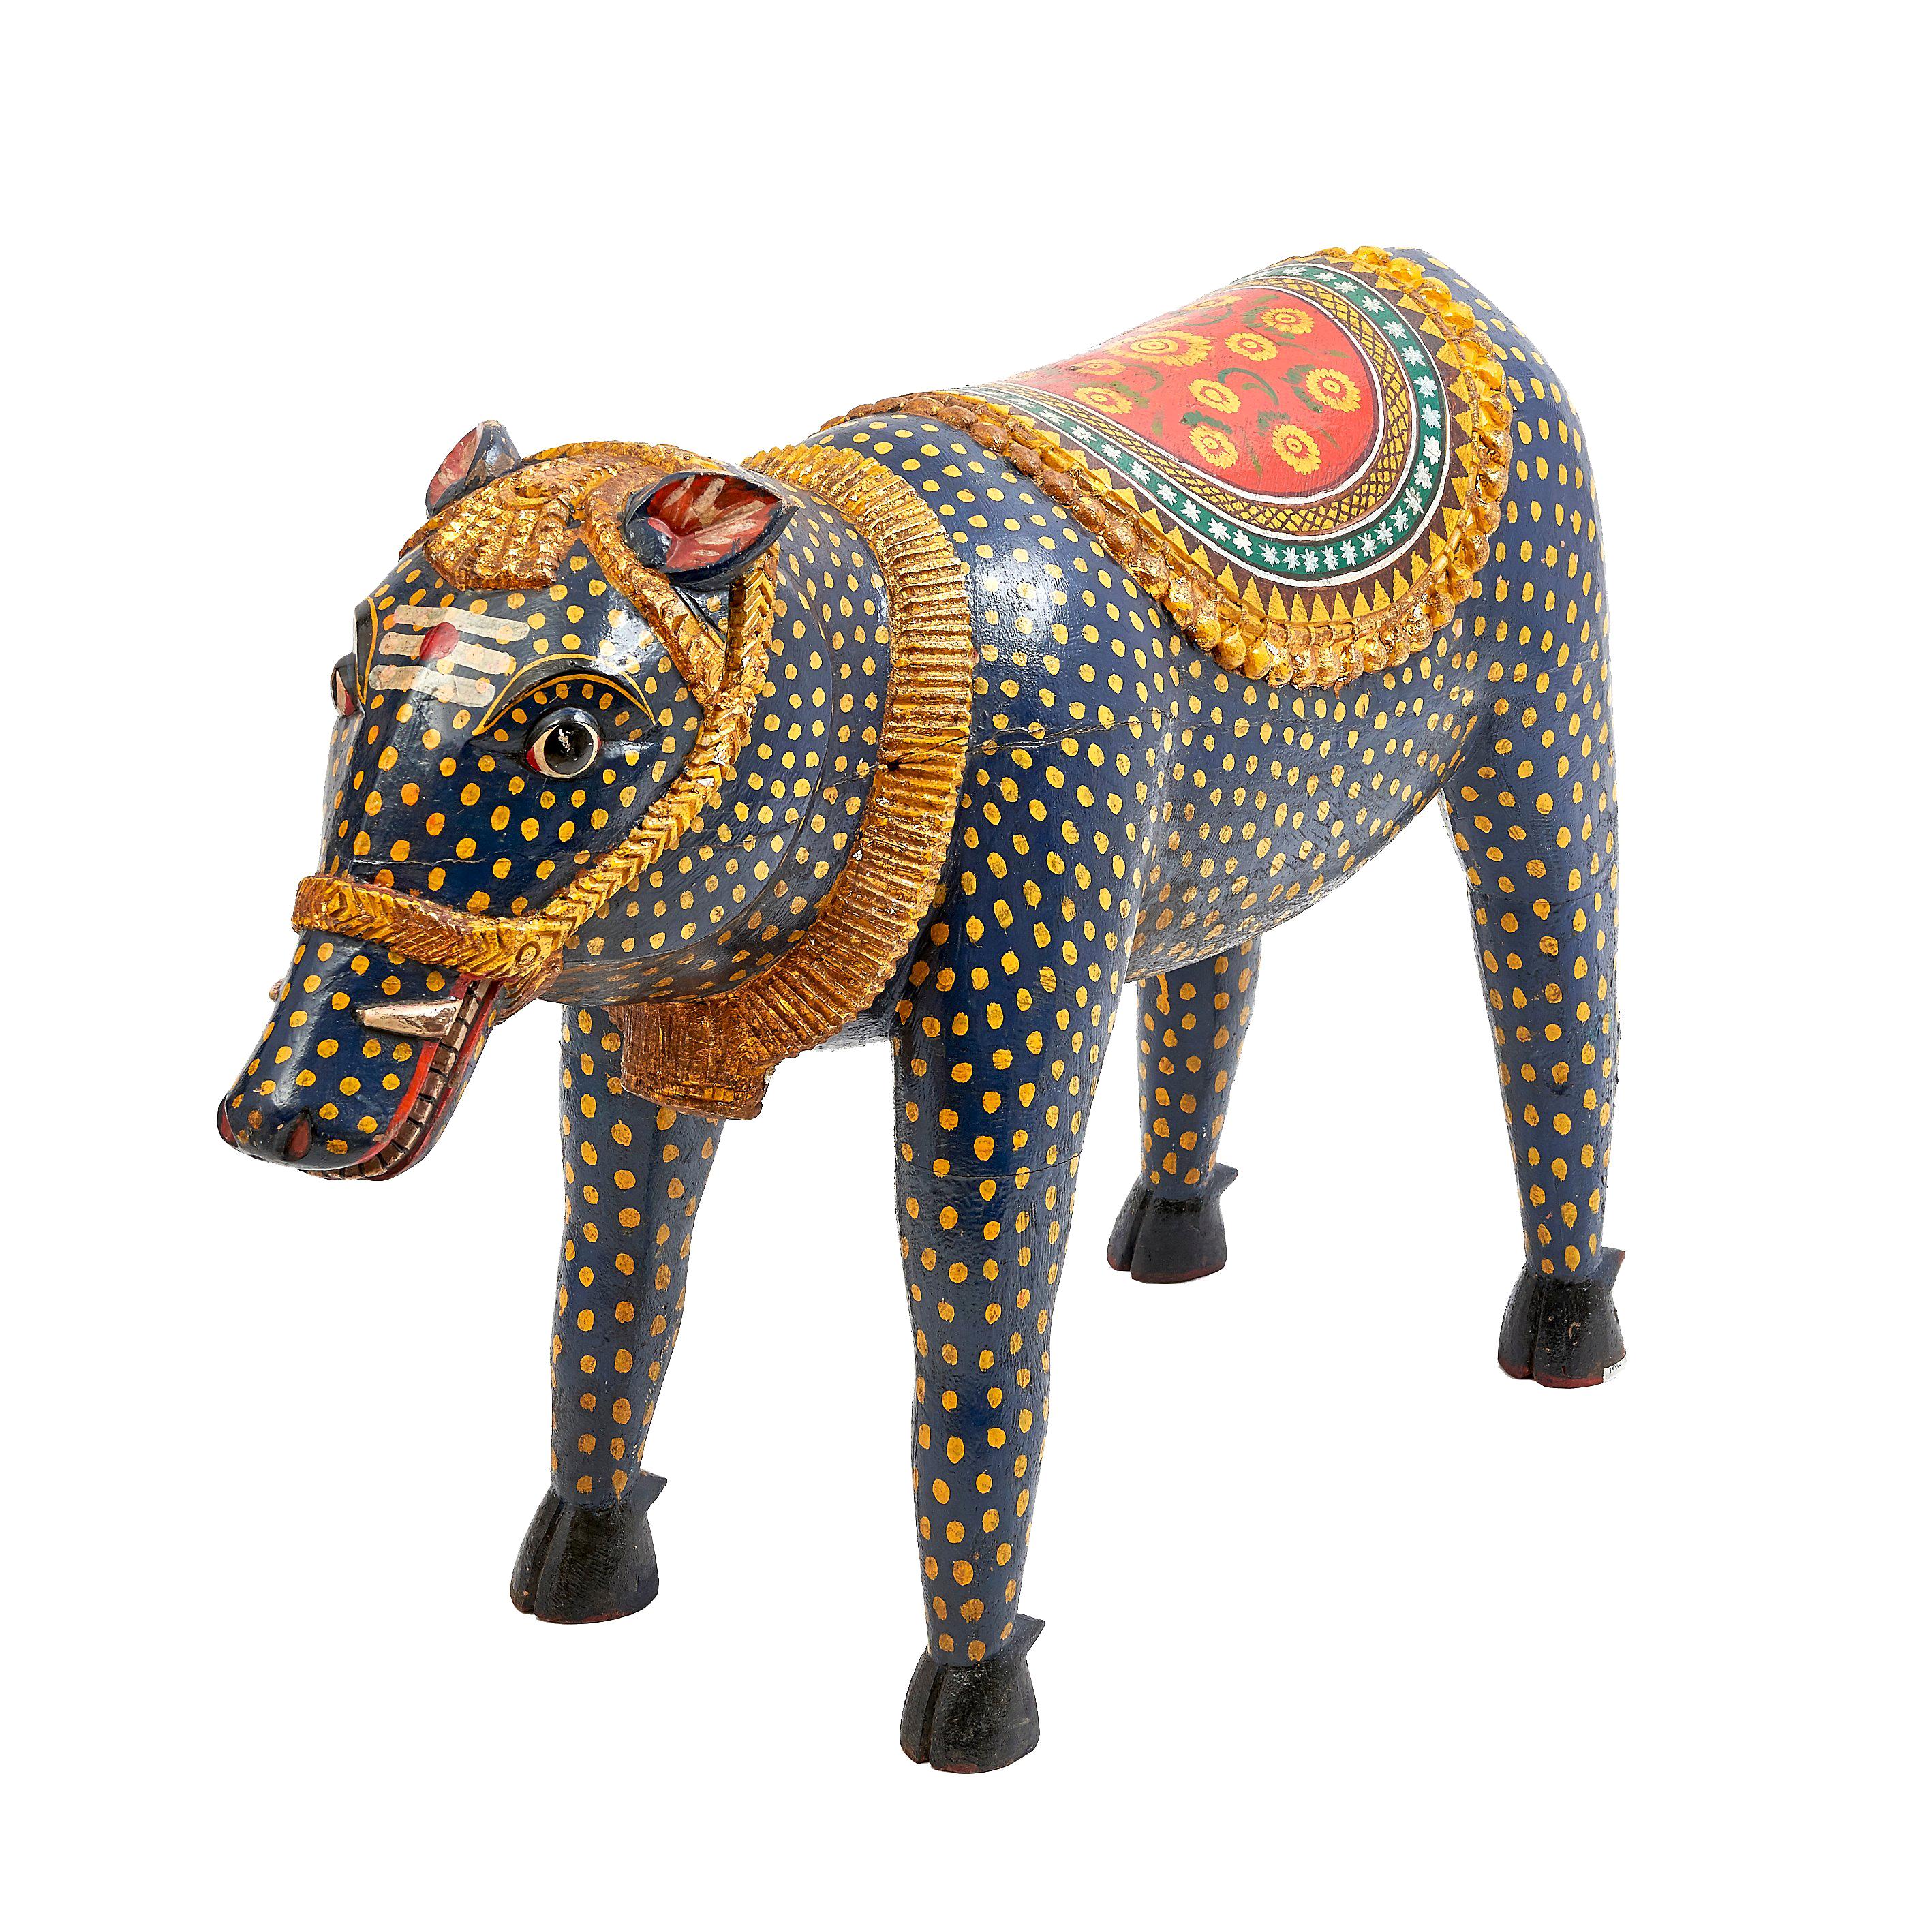 Rare Large Indian Ceremonial Wooden Painted Boar "Varaha", 20th Century For Sale